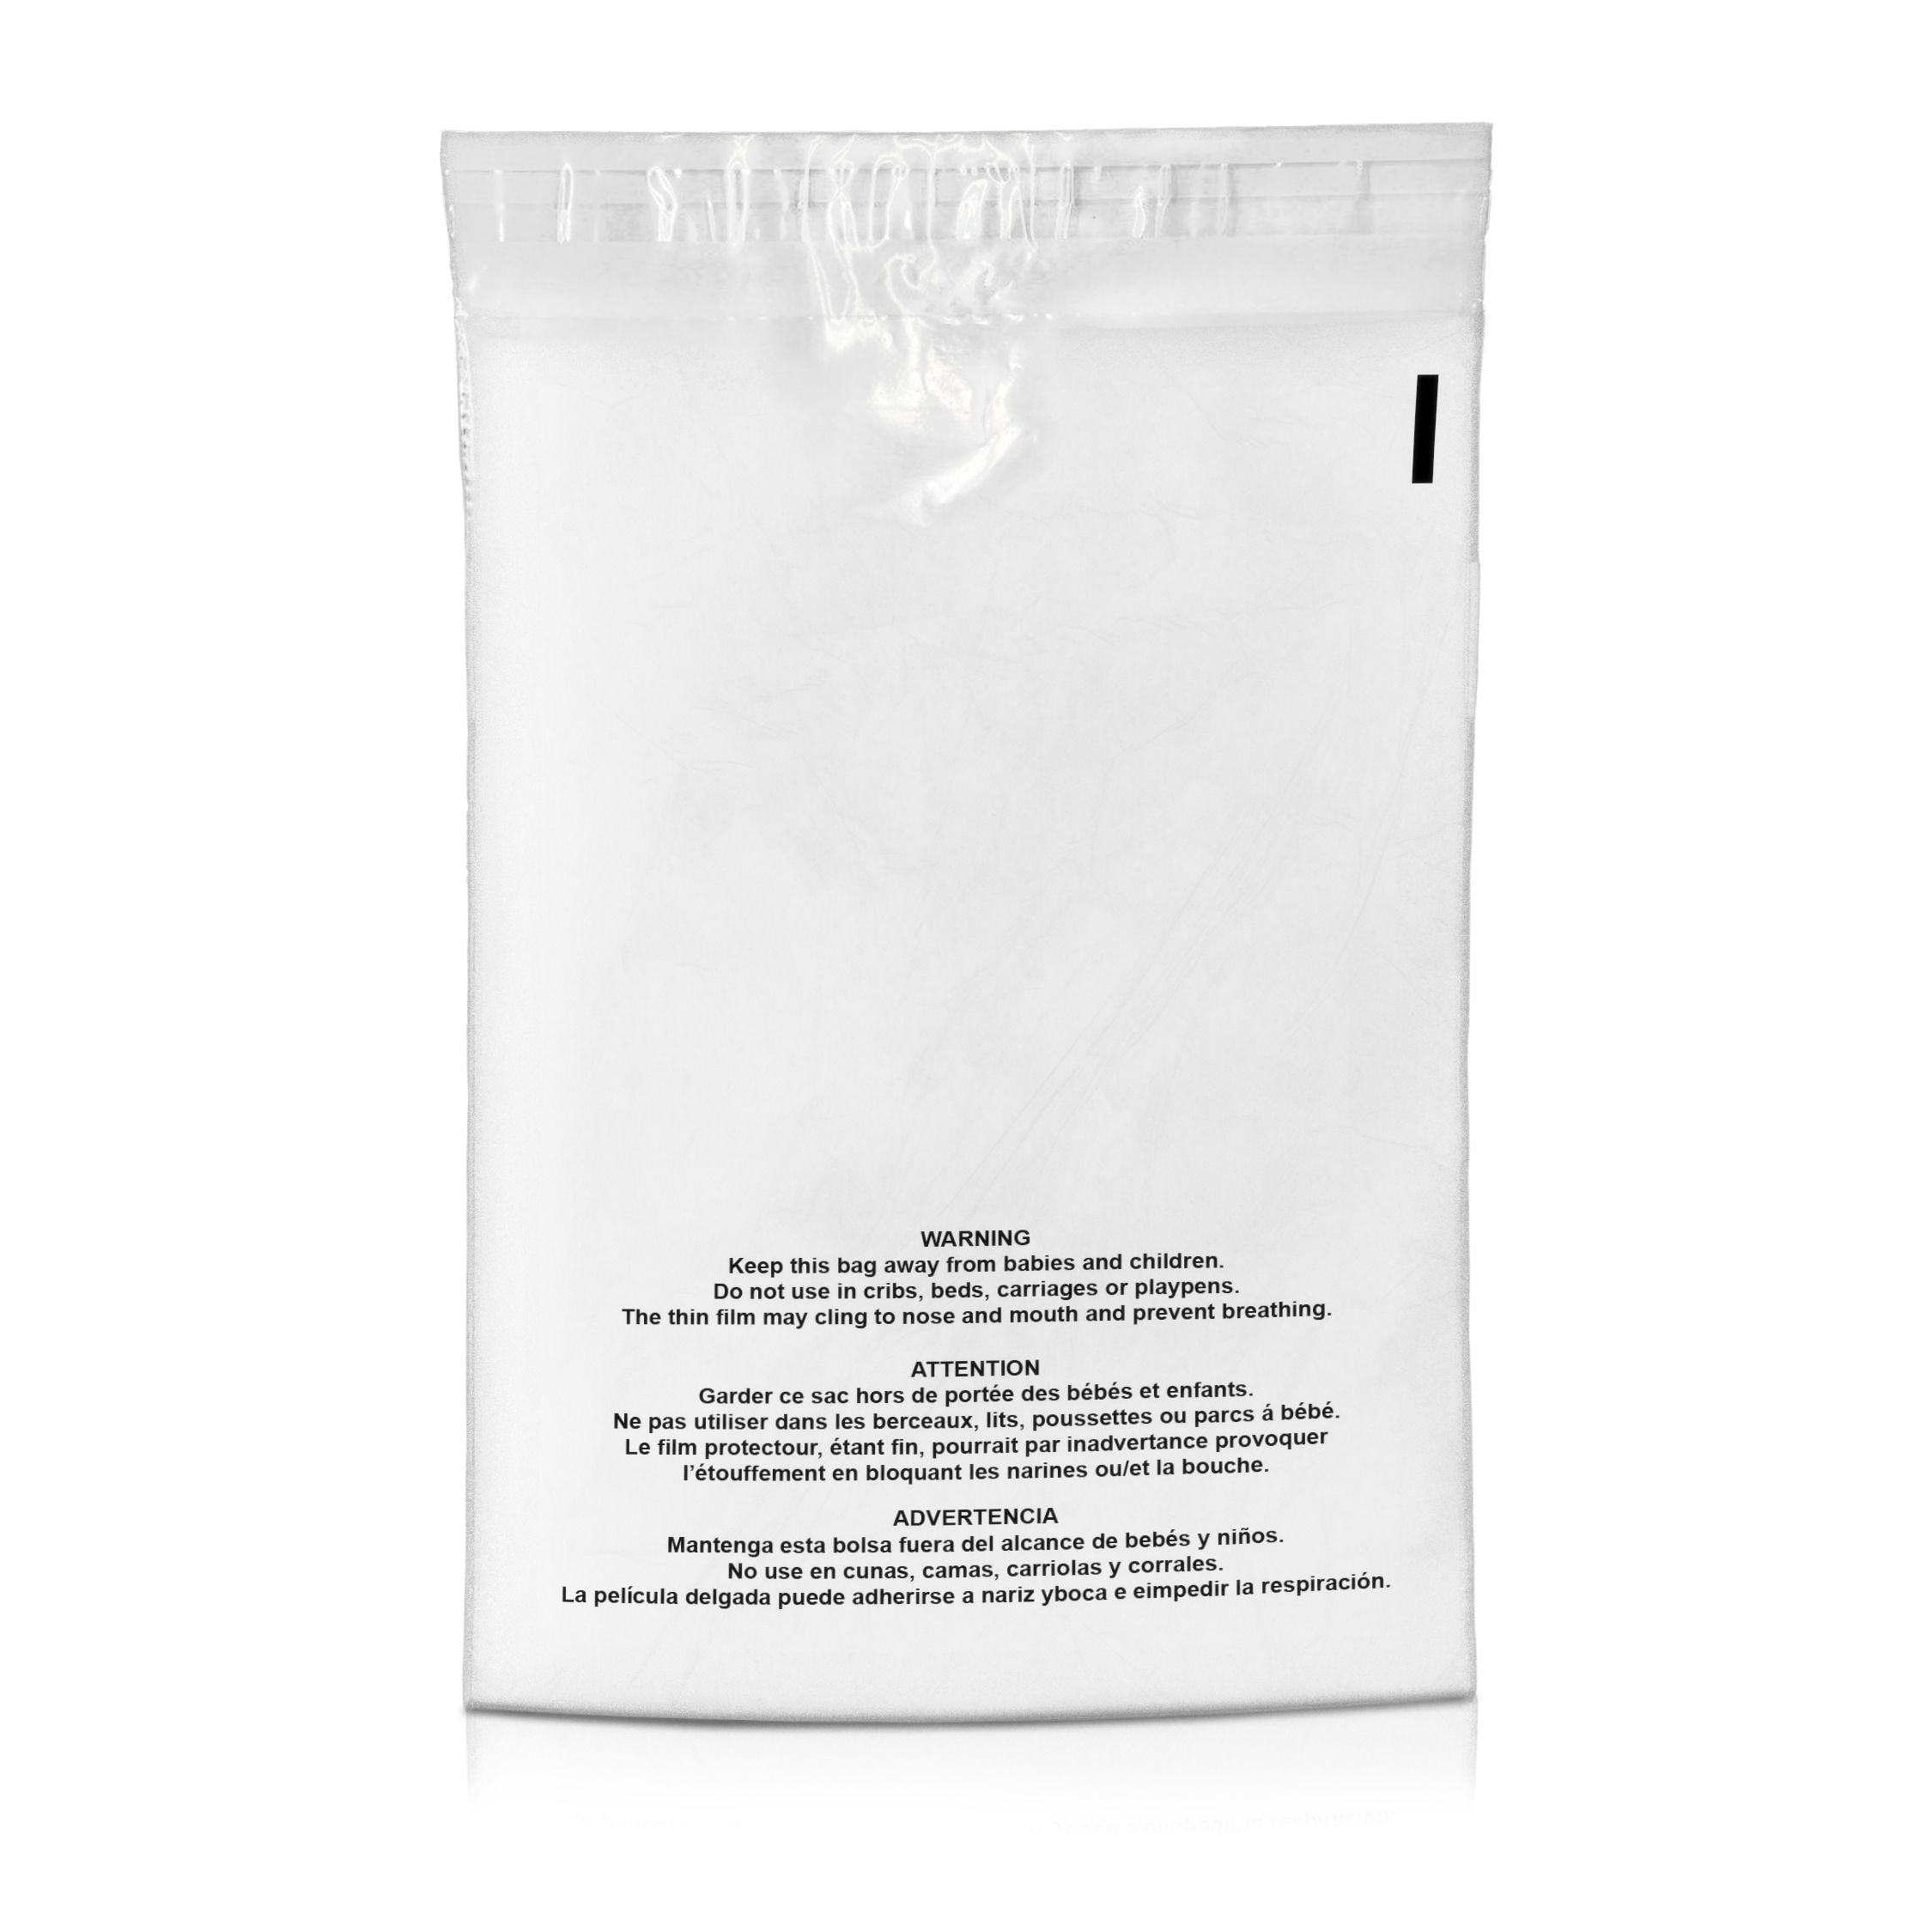 Details about   1000 6 x 9 Biodegradable Self Seal Suffocation Warning Clear Poly Bags 1.5 mil 